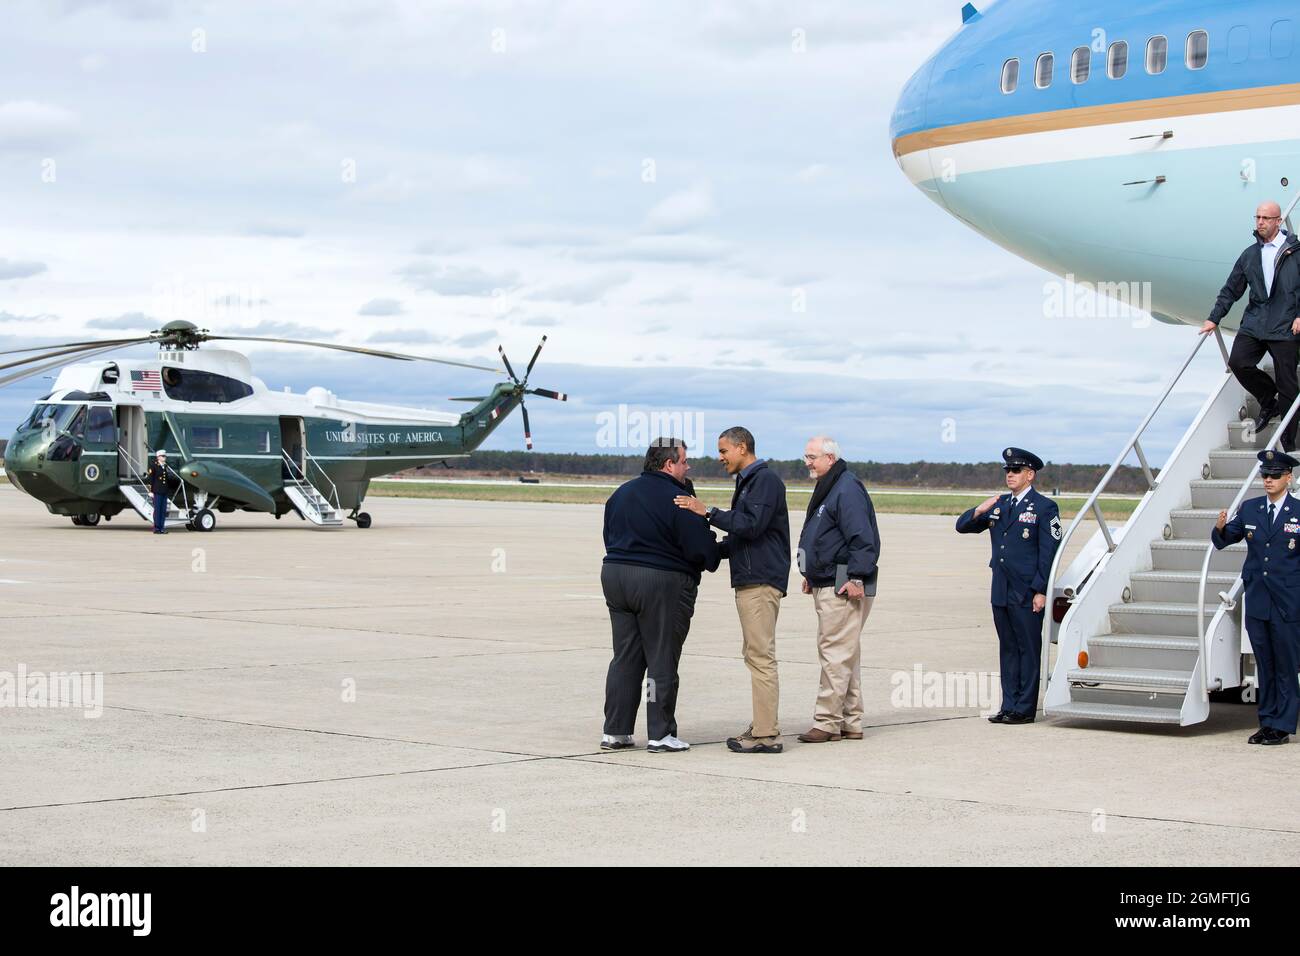 President Barack Obama and FEMA Administrator Craig Fugate greet New Jersey Gov. Chris Christie on the tarmac of Atlantic City International Airport in Atlantic City, N.J., Oct. 31, 2012. (Official White House Photo by Chuck Kennedy) This official White House photograph is being made available only for publication by news organizations and/or for personal use printing by the subject(s) of the photograph. The photograph may not be manipulated in any way and may not be used in commercial or political materials, advertisements, emails, products, promotions that in any way suggests approval or end Stock Photo